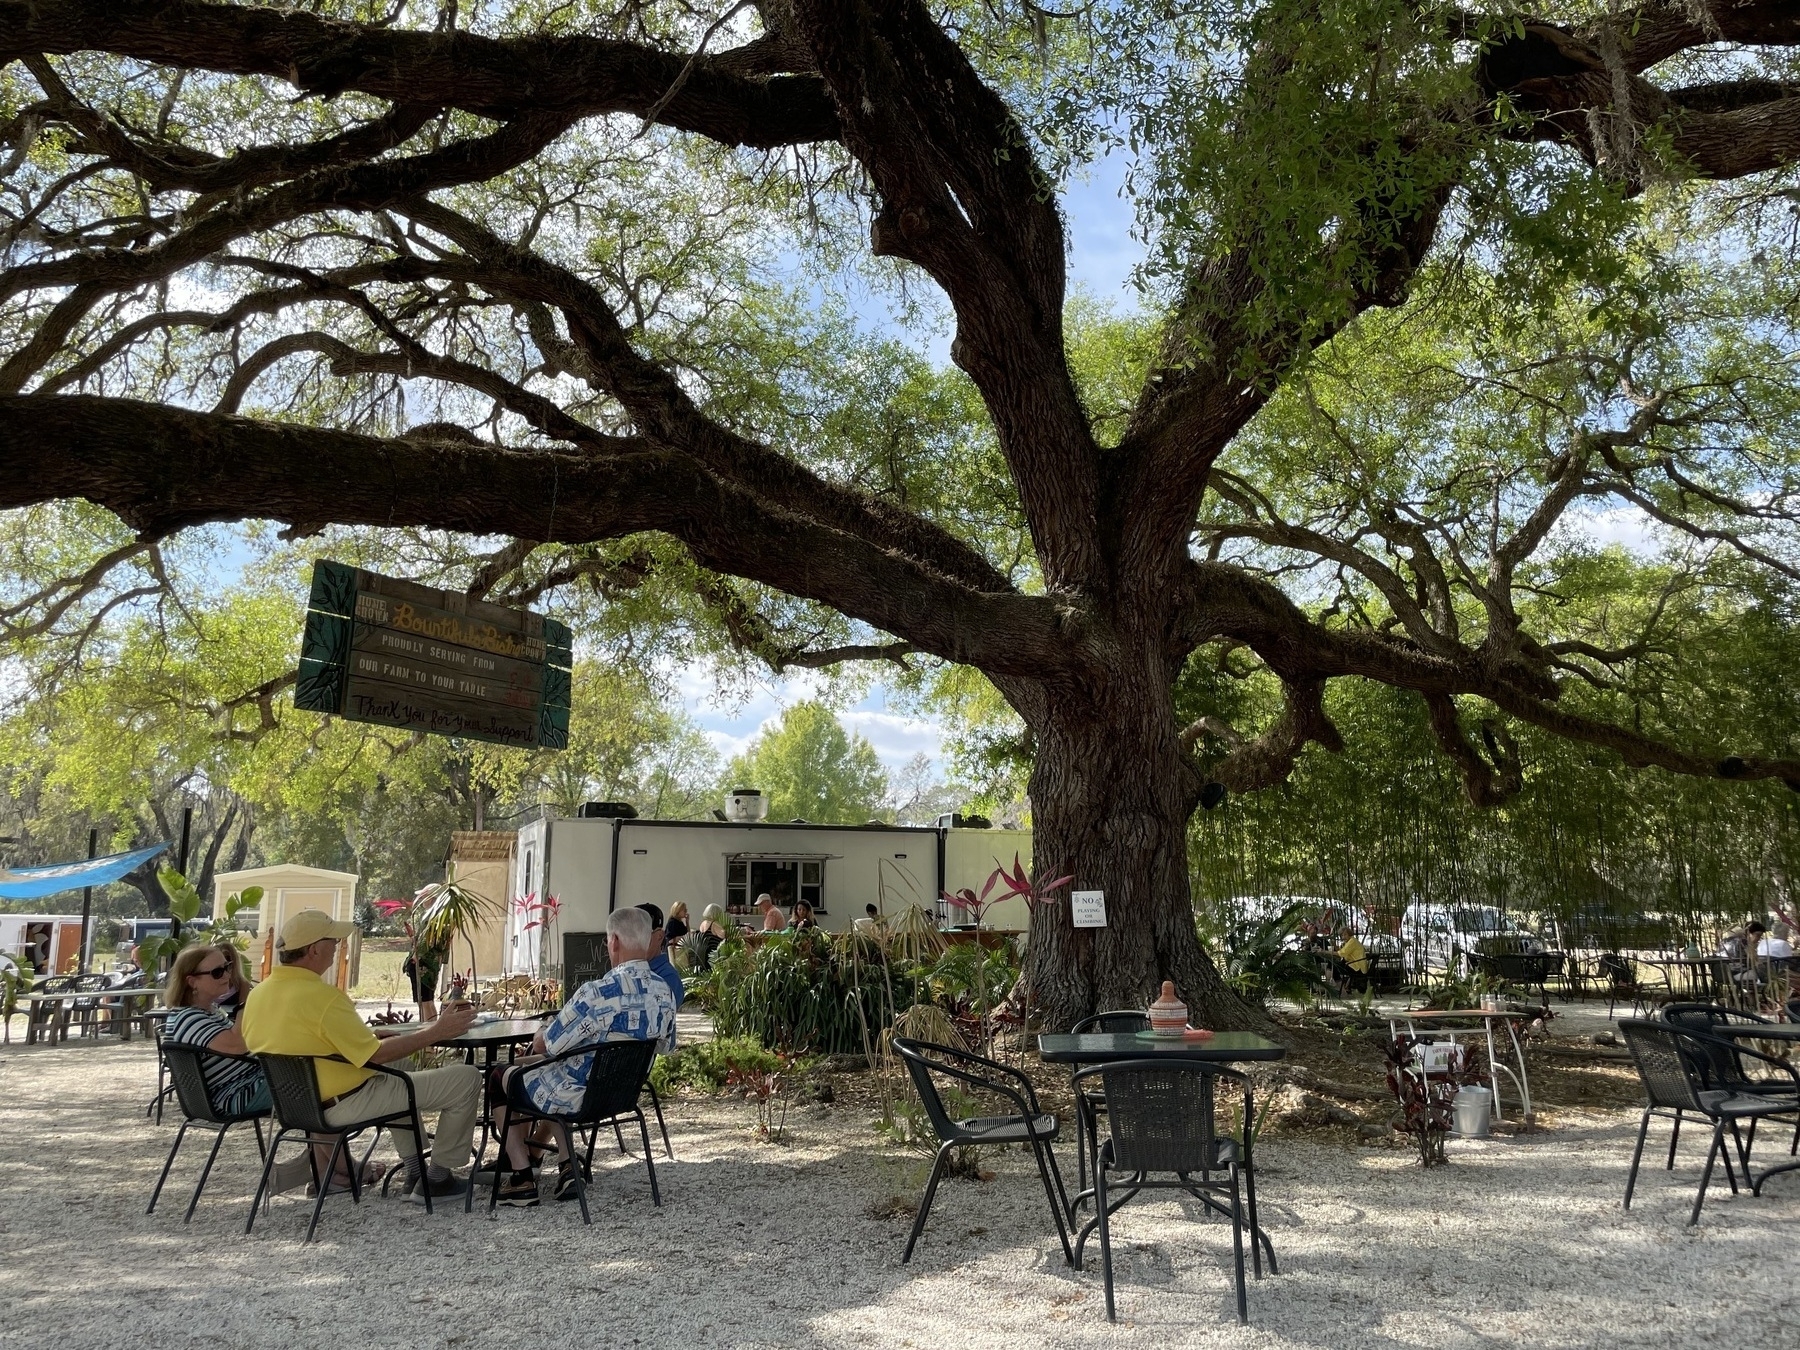 Outdoor cafe tables under an old, giant oak tree, with the kitchen trailer visible in the background.